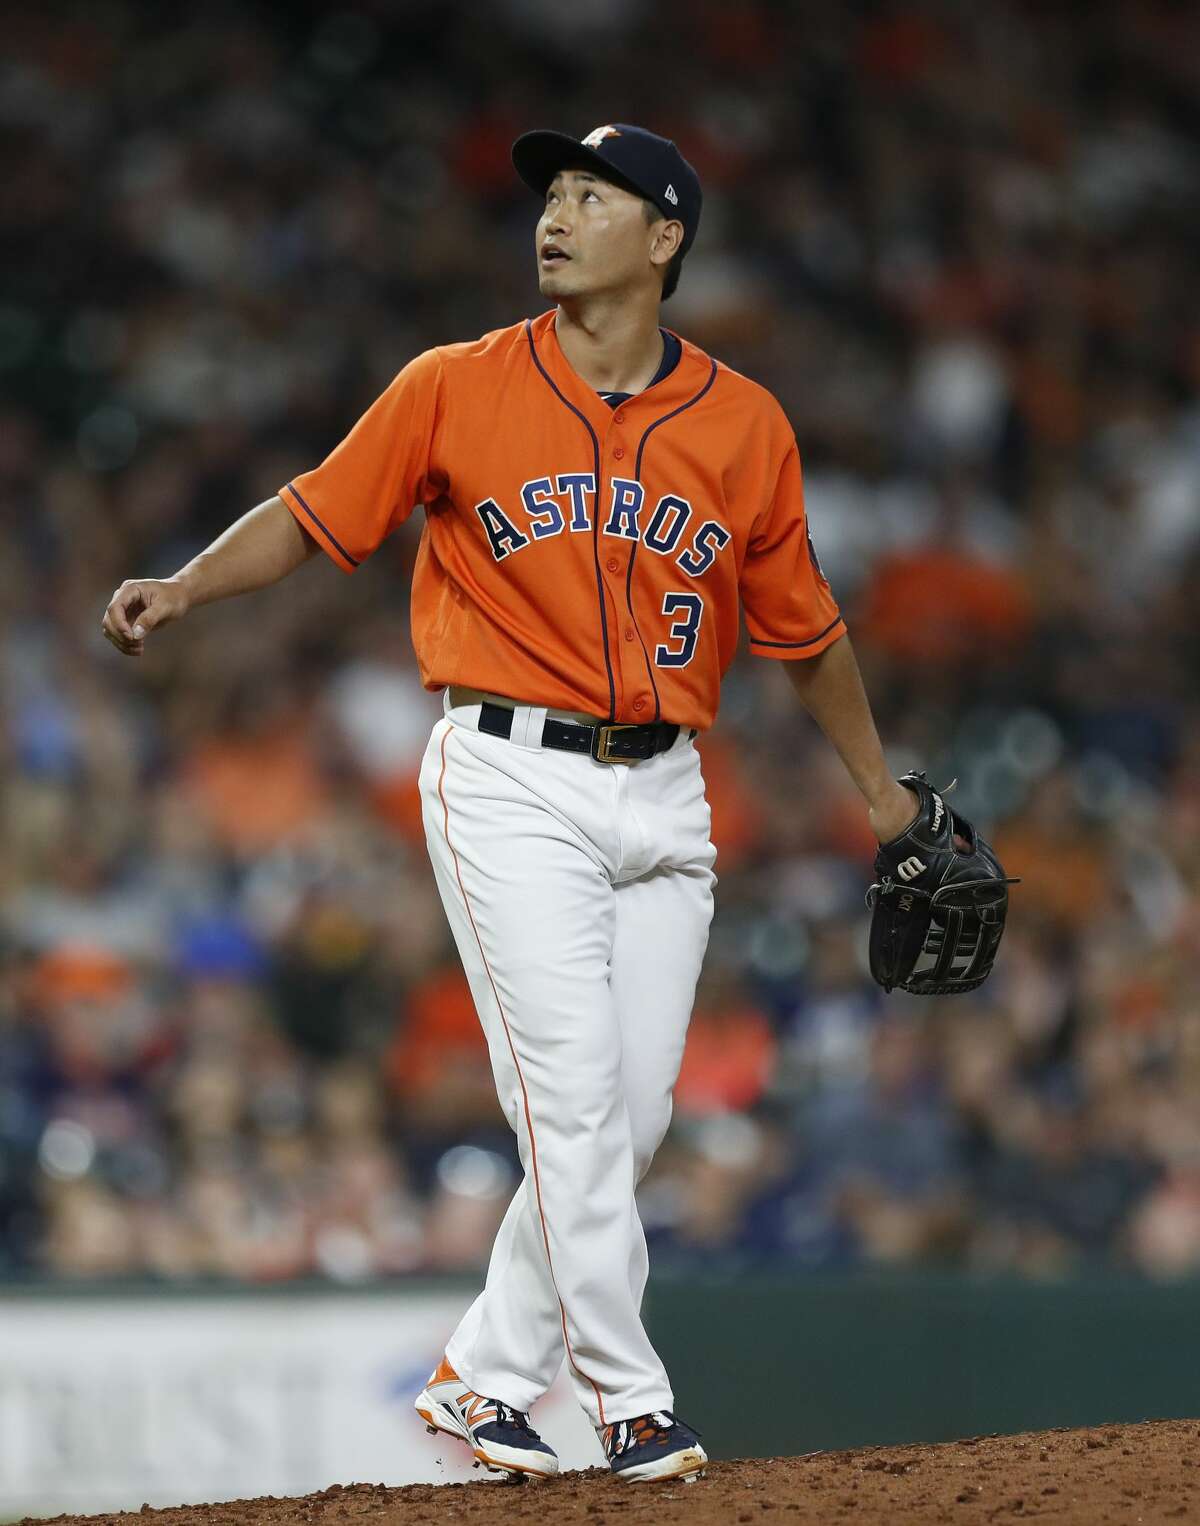 Houston Astros left fielder Norichika Aoki (3) pitches in relief during the ninth inning of an MLB baseball game at Minute Maid Park, Friday, June, 30, 2017. ( Karen Warren / Houston Chronicle )